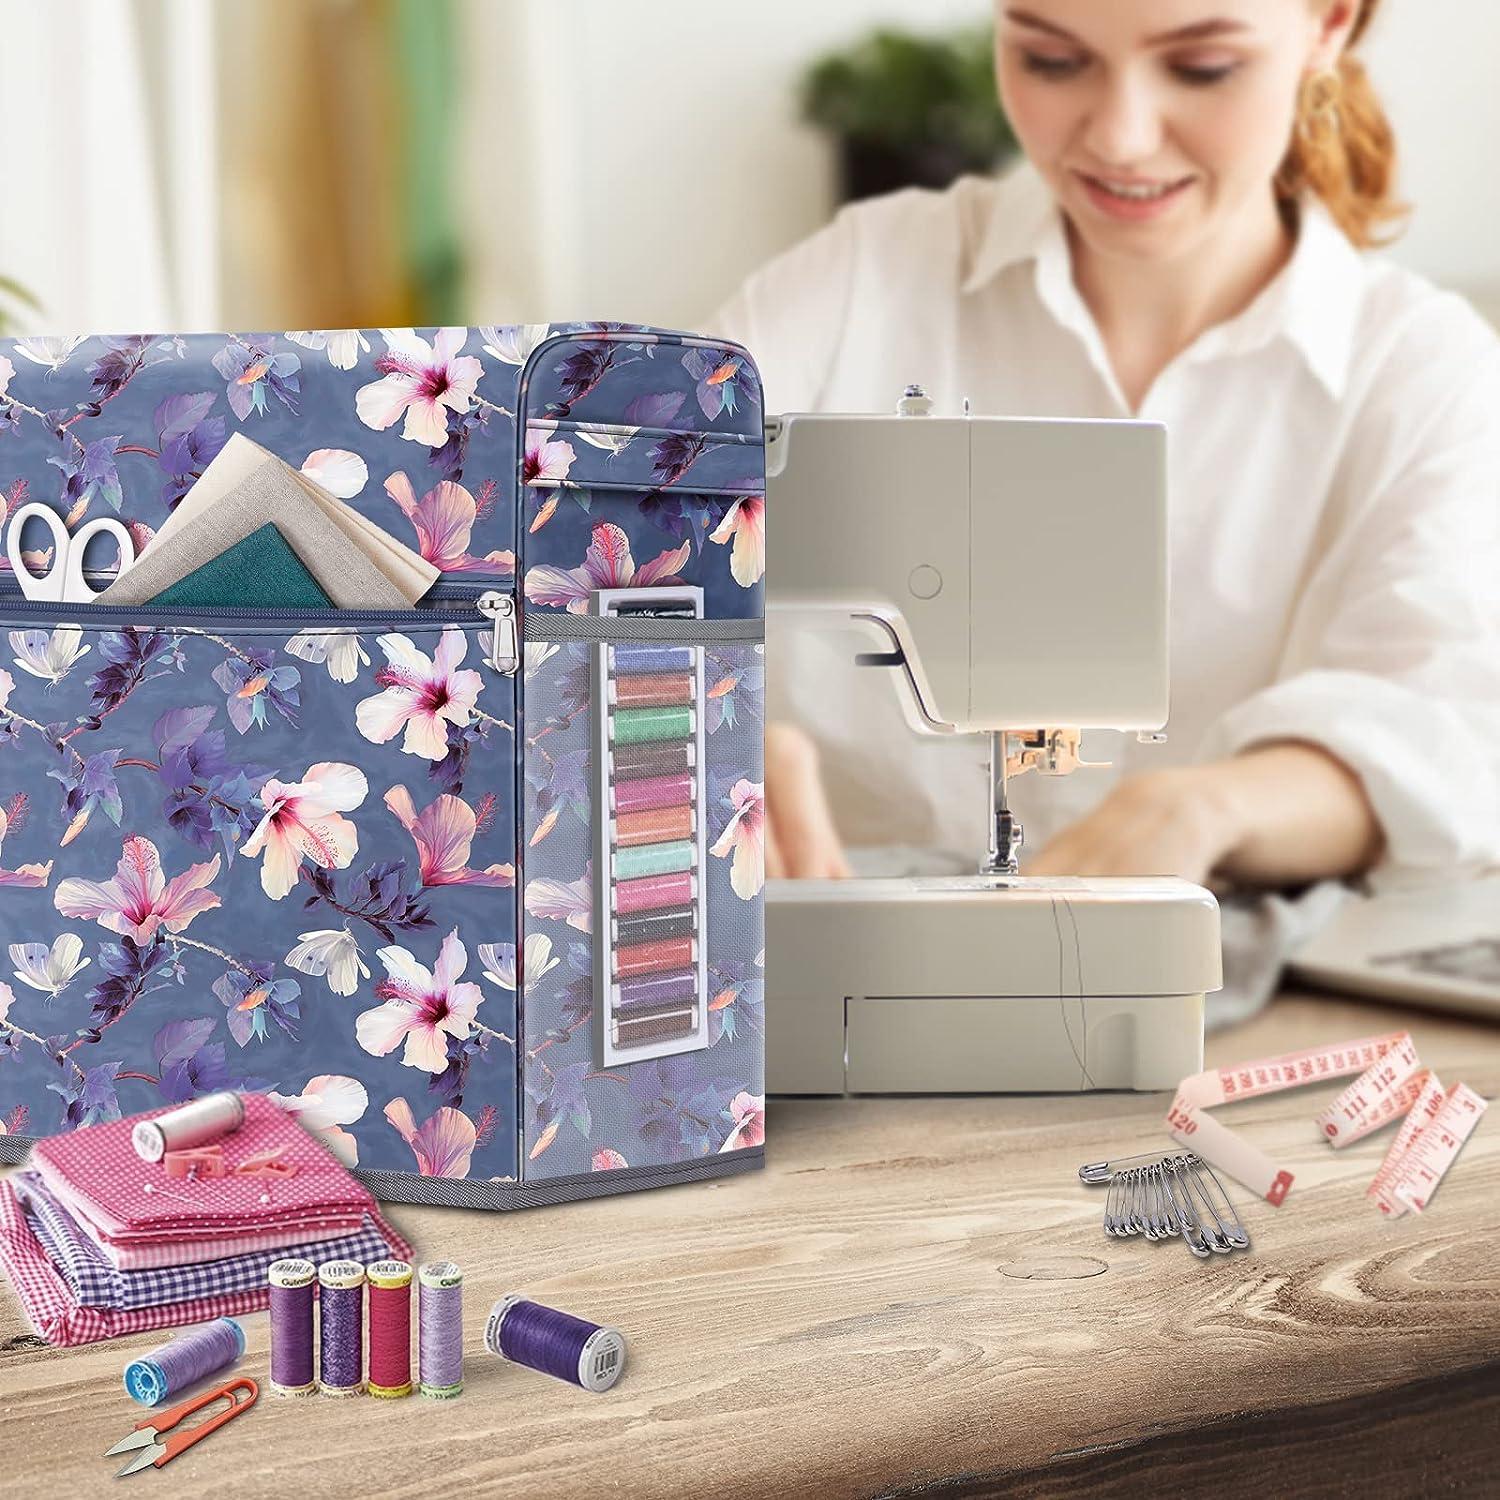 Natur@cho Sewing Machine Dust Cover, Durable Cover Compatible with Most Standard Singer and Brother Sewing Machine with Pockets